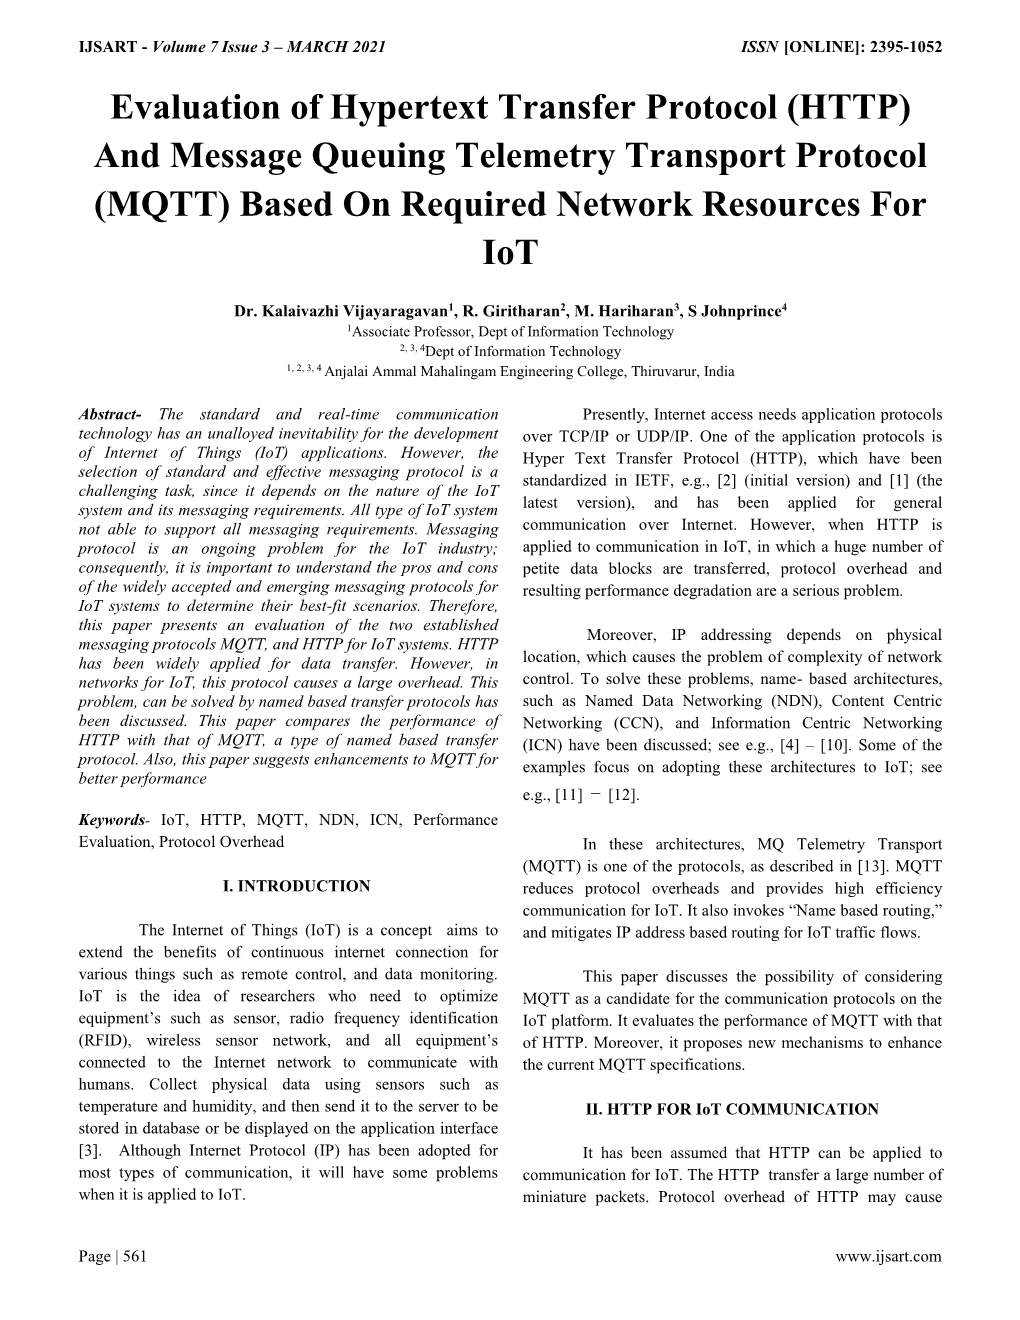 Evaluation of Hypertext Transfer Protocol (HTTP) and Message Queuing Telemetry Transport Protocol (MQTT) Based on Required Network Resources for Iot